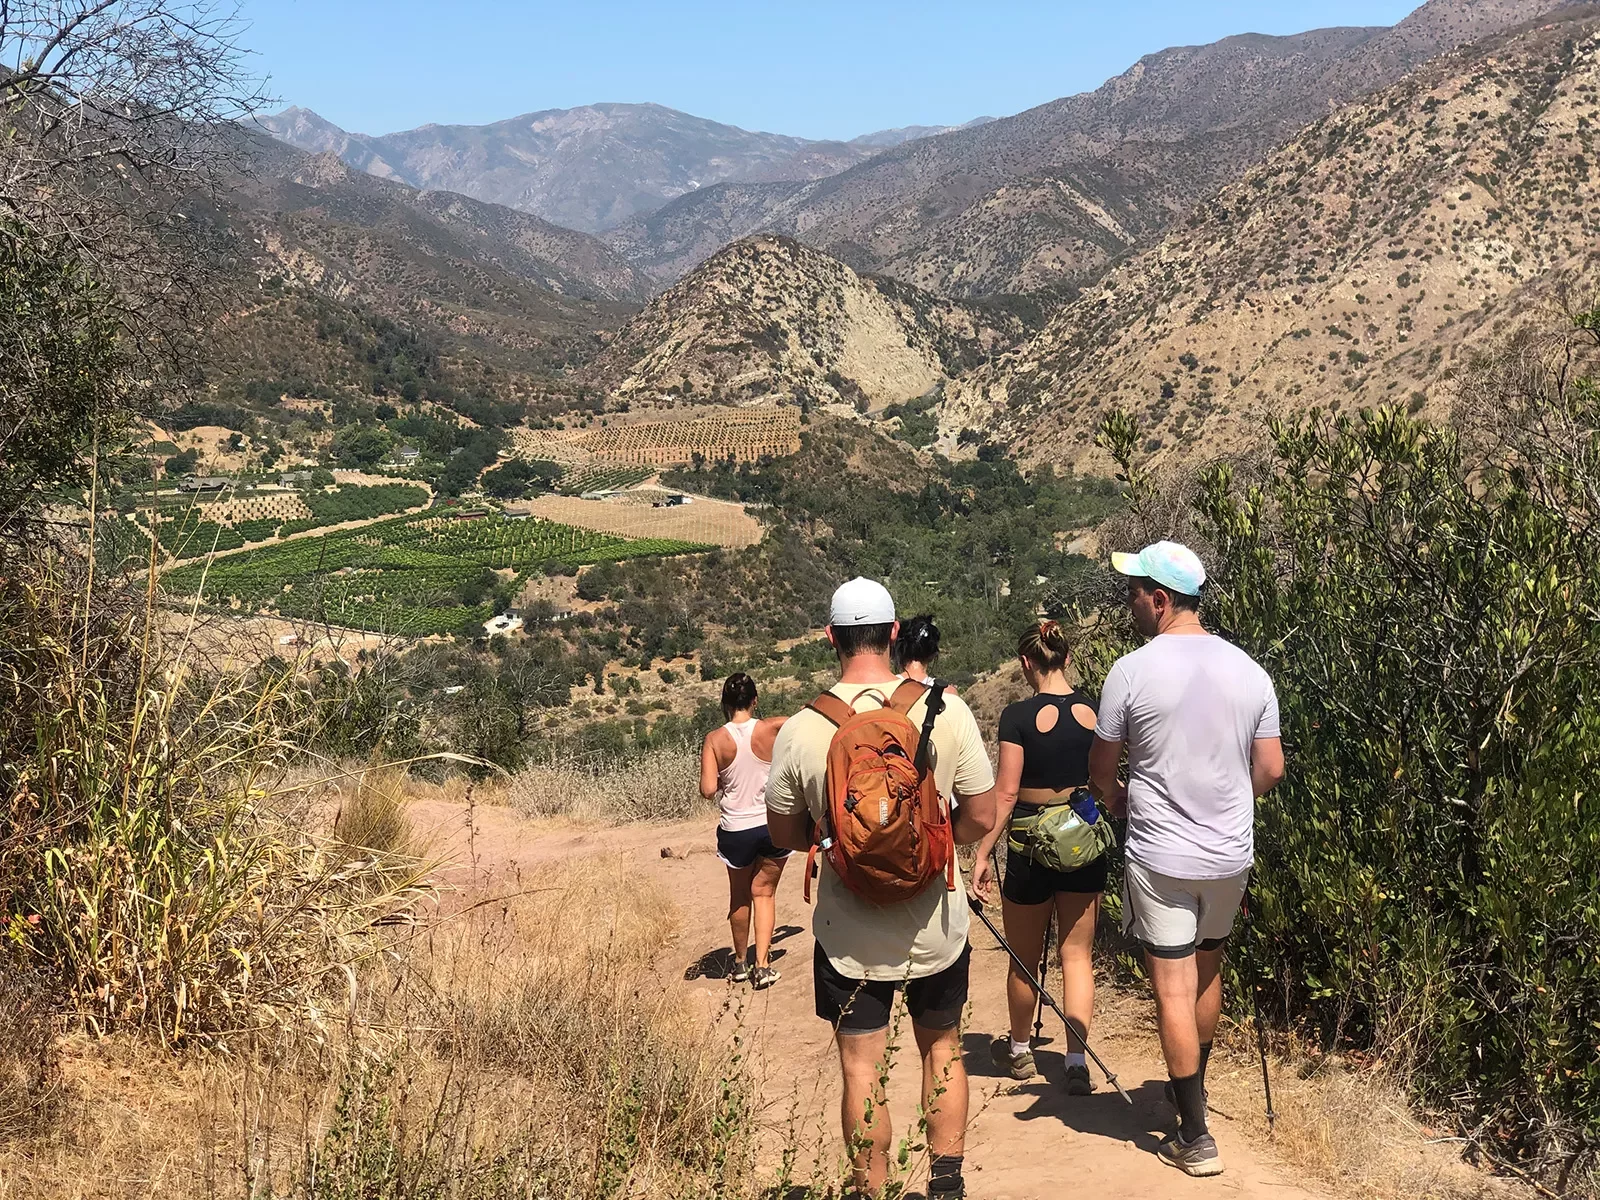 Five guests hiking down hilly trail, vineyard in distant valley.